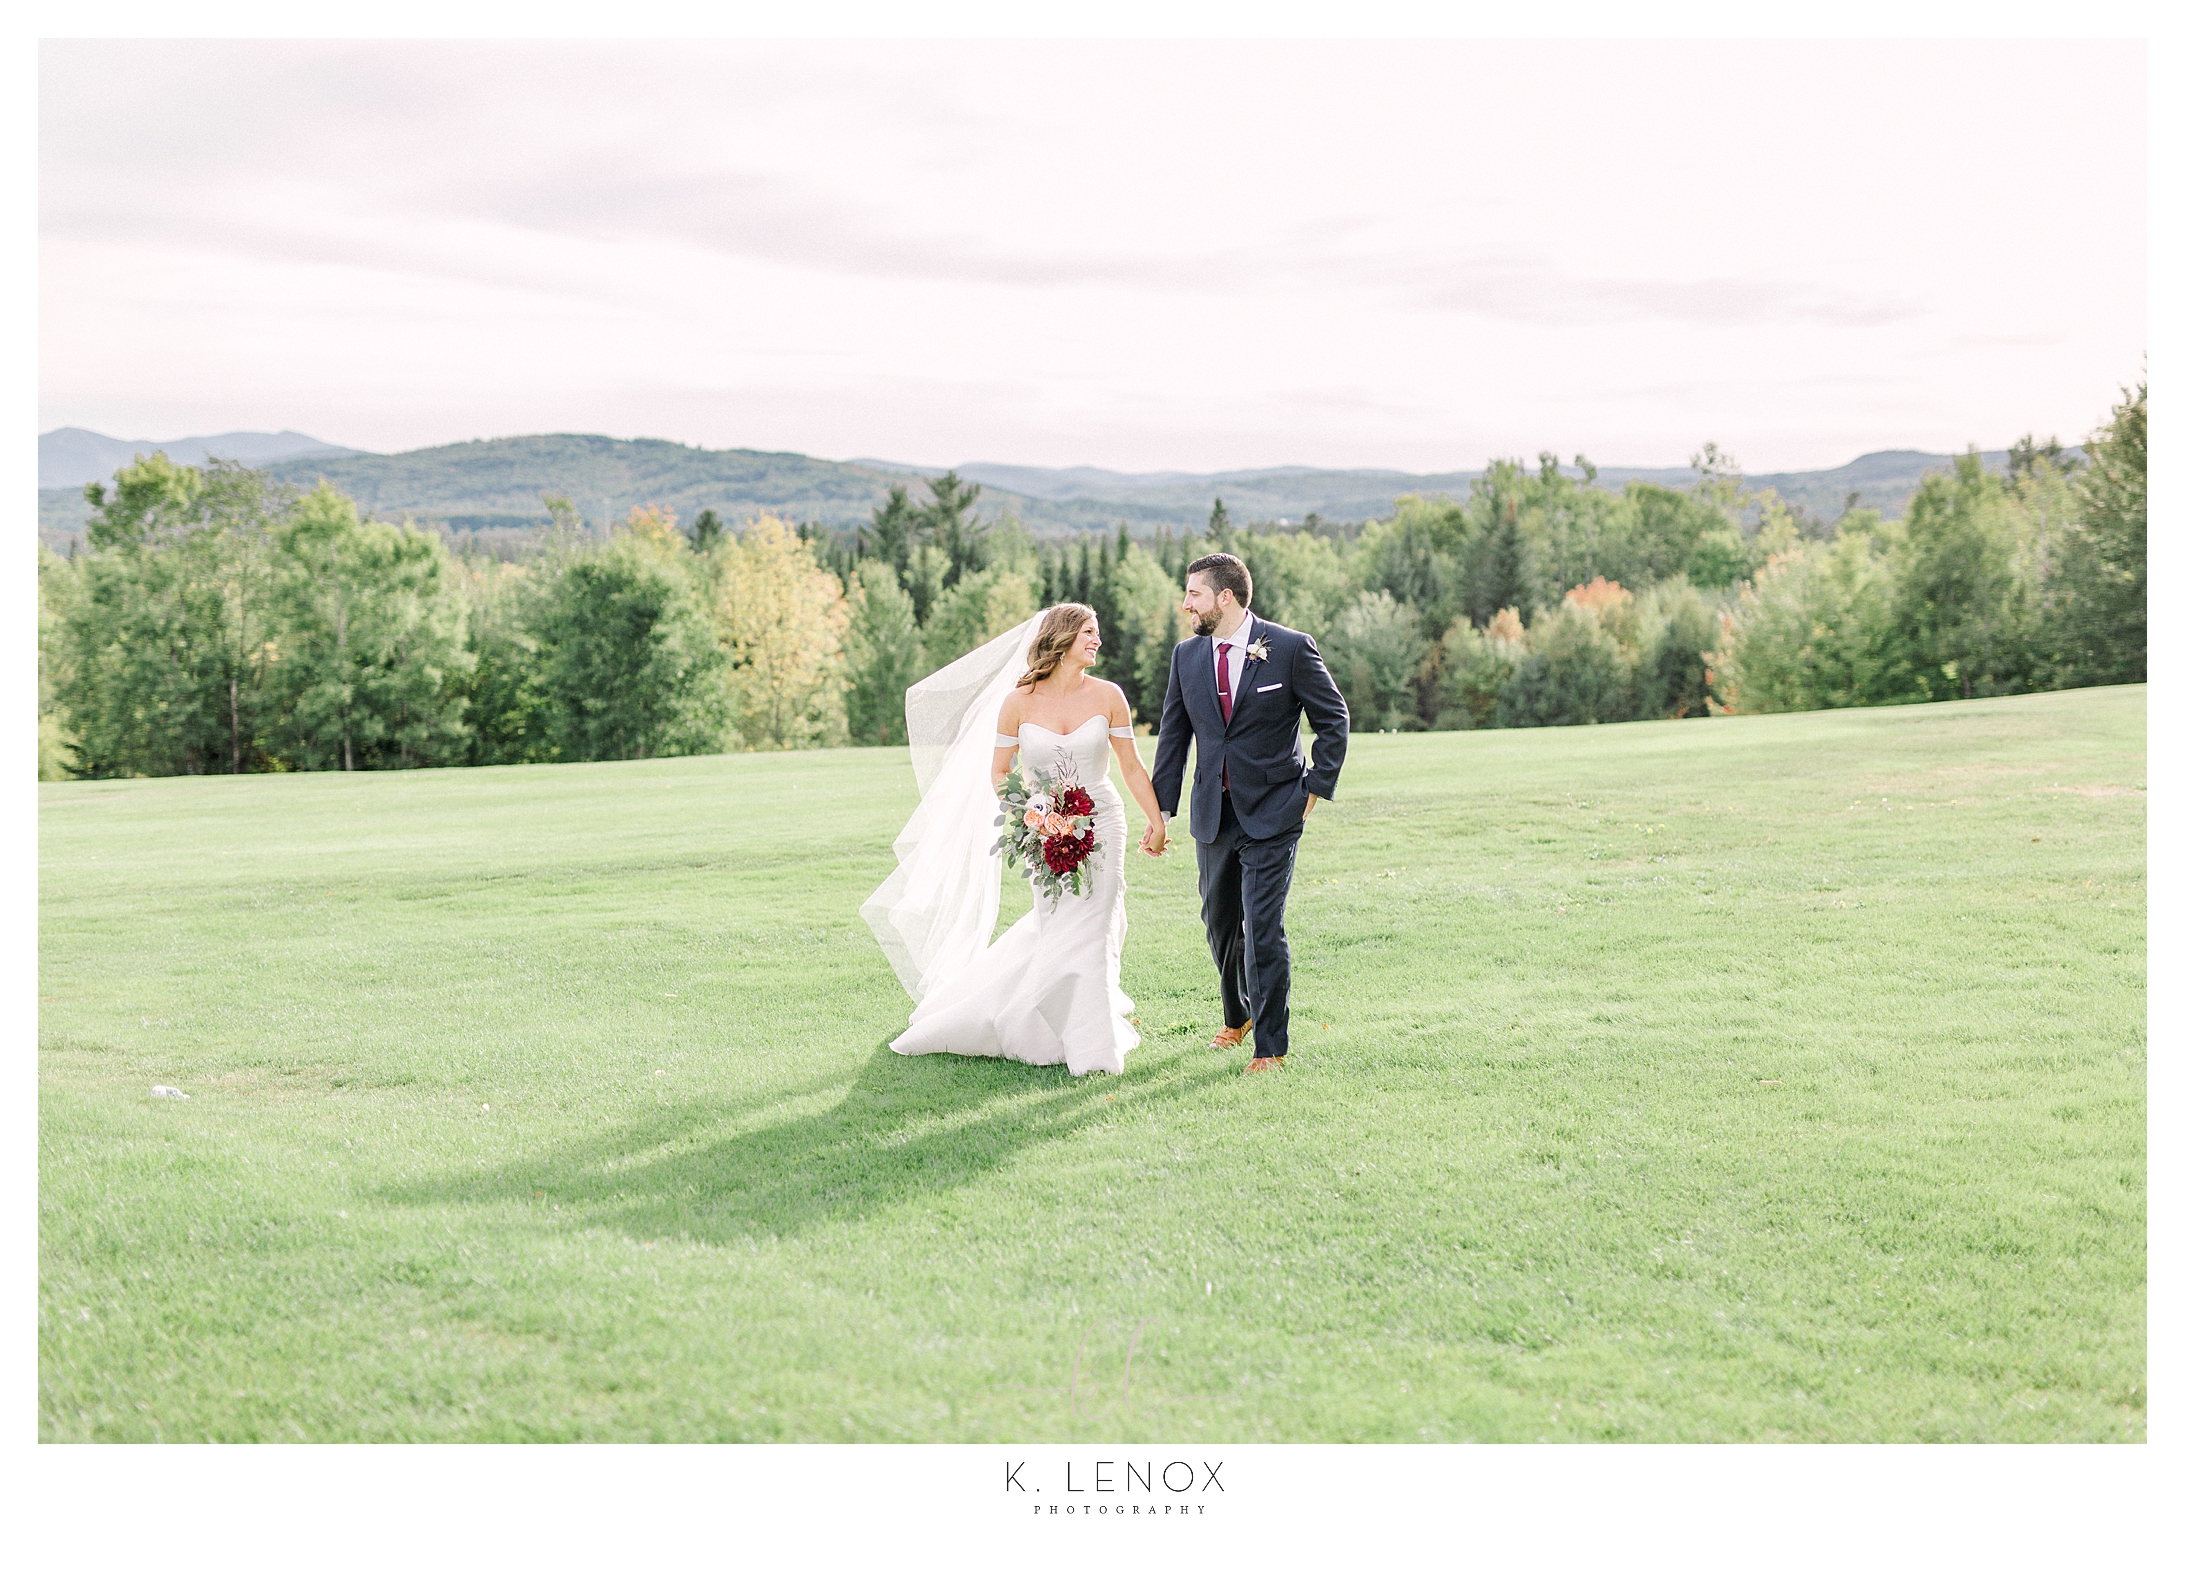 Bride and Groom walk hand in hand at the Mountain View Grand resort in Northern NH.